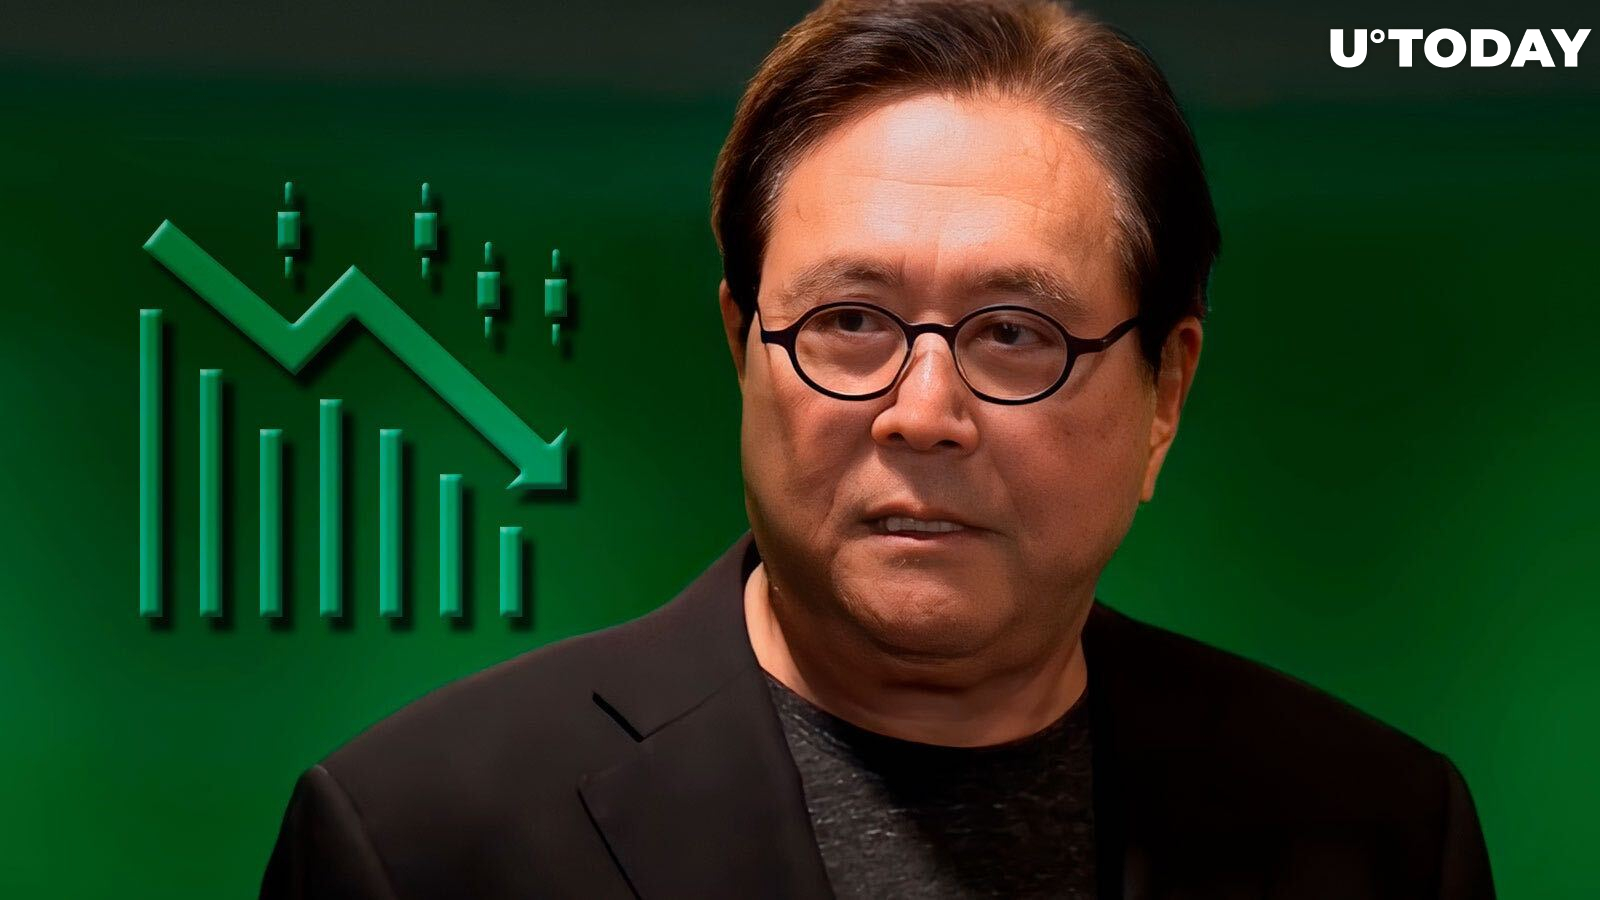 "Rich Dad, Poor Dad" Author Kiyosaki Says Market Crash He Foretold in 2013 Is Here and It's Time to Get Richer